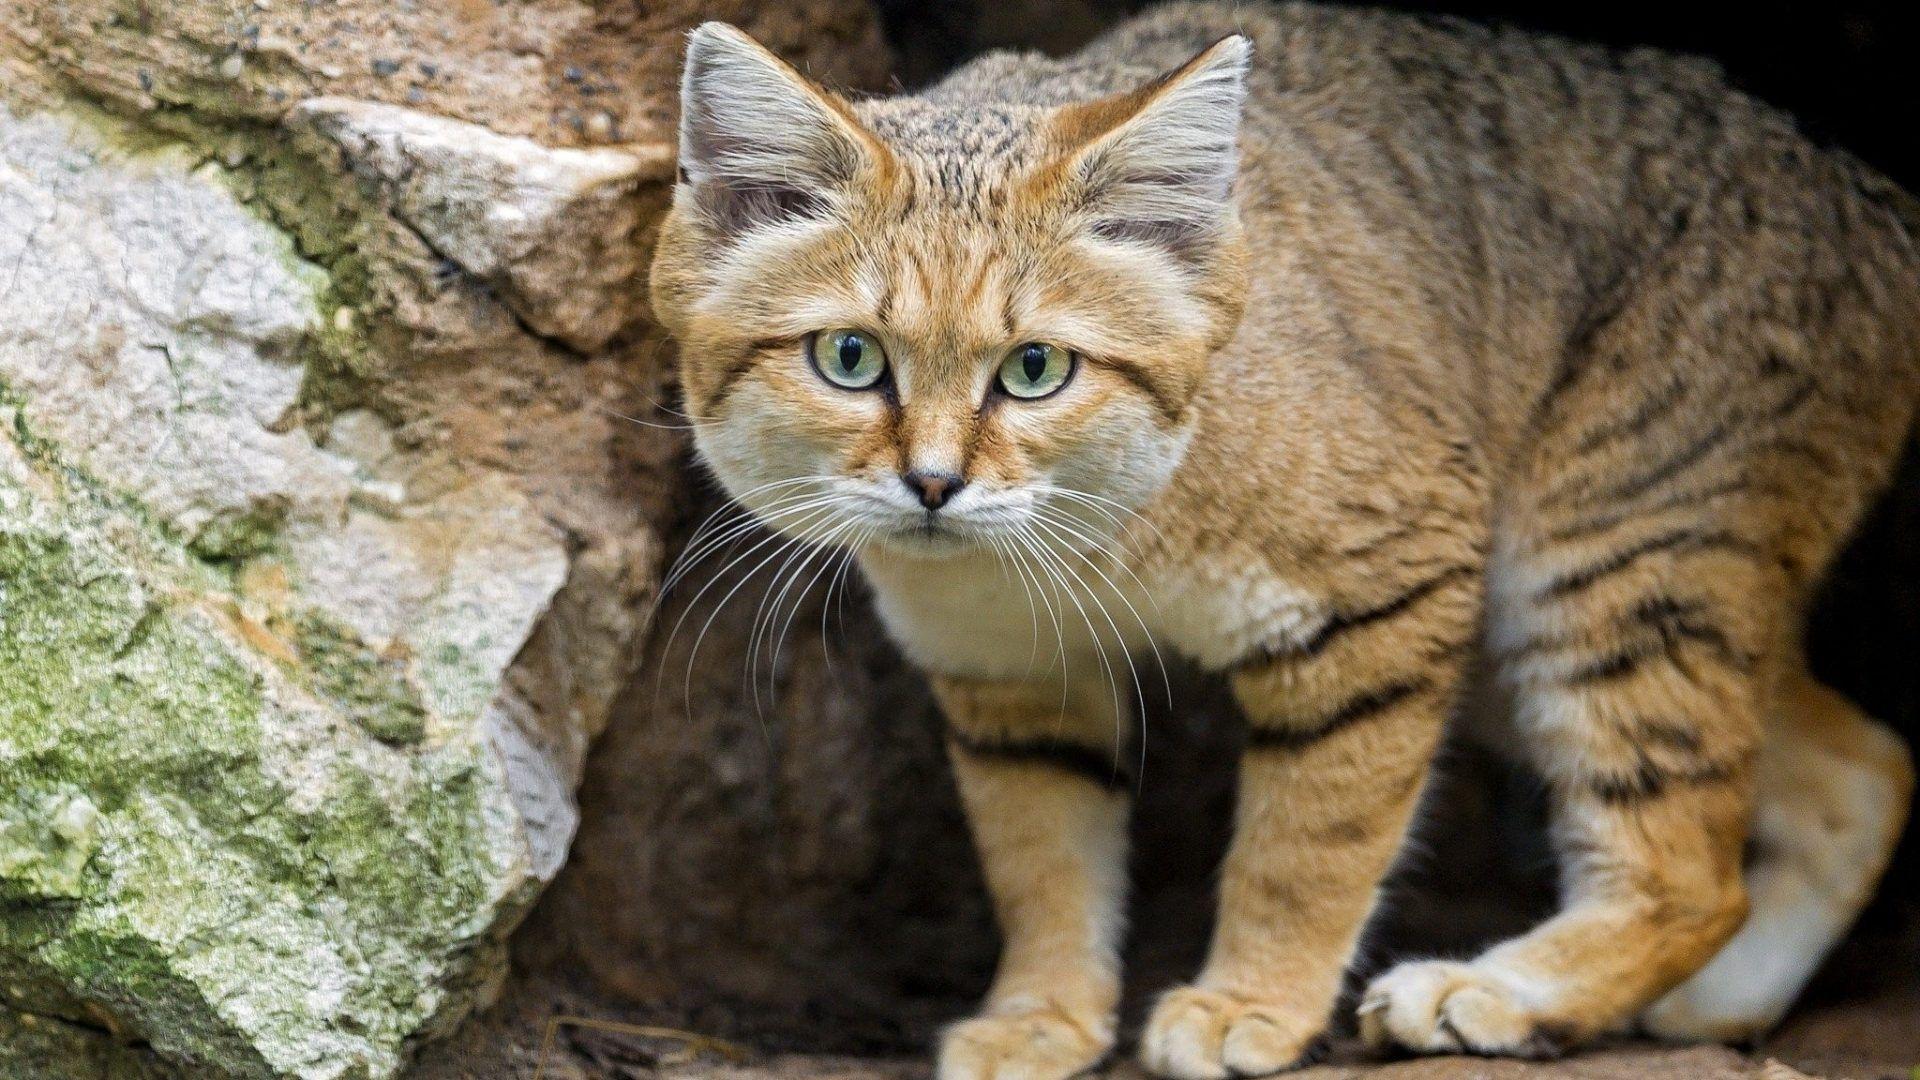 Sand Tag wallpaper: Sand Animals Cat Photo Of Blue Russian Cats